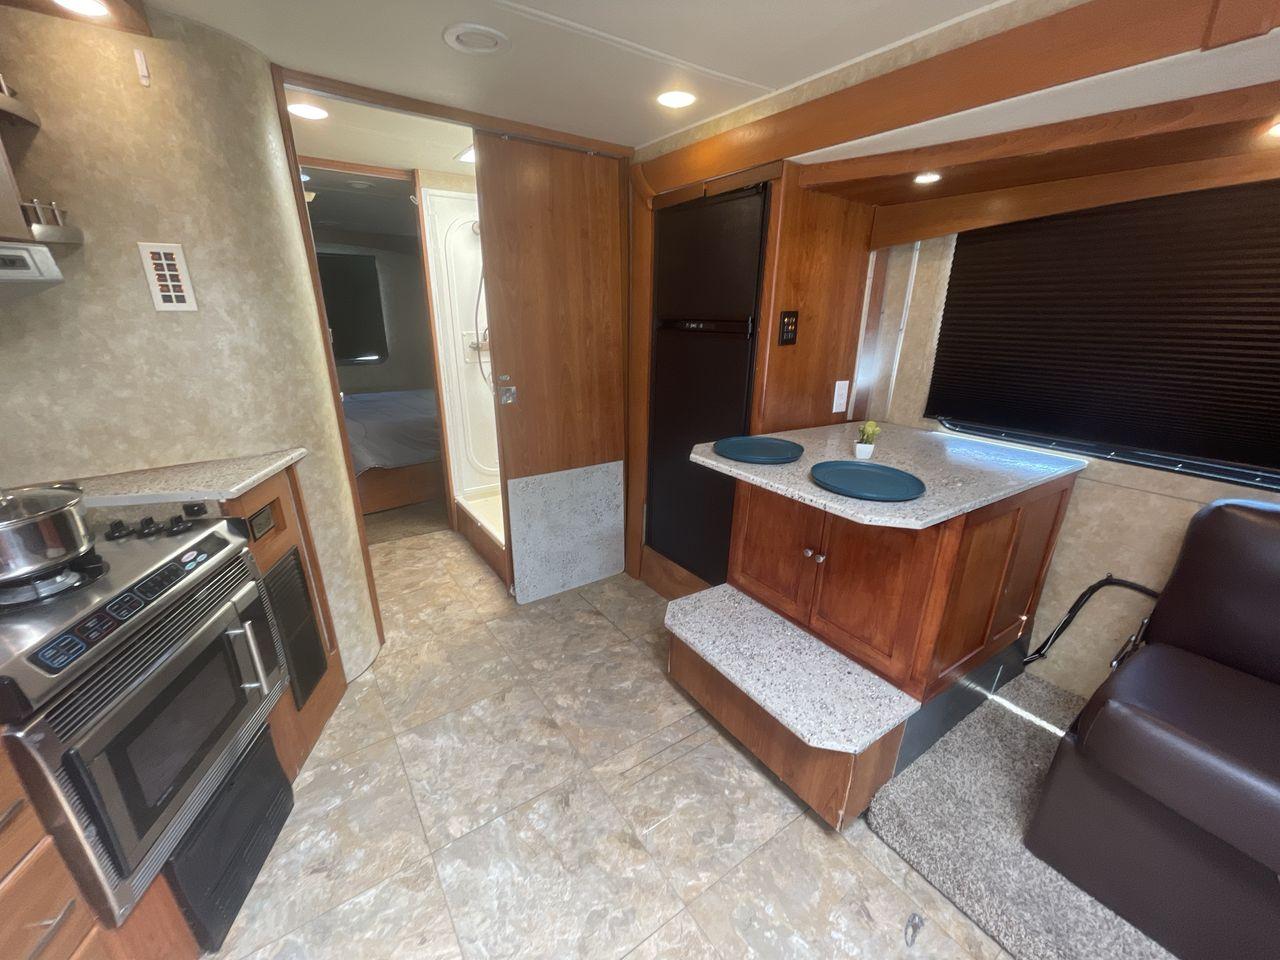 2008 TAN COACHMEN LEPRECHAUN 320DS E-450 (1FDXE45S08D) with an 6.8L V10 SOHC 20V engine, Length: 31.5 ft. | Dry Weight: 12,555 lbs. | Gross Weight: 14,500 lbs. | Slides: 2 transmission, located at 4319 N Main St, Cleburne, TX, 76033, (817) 678-5133, 32.385960, -97.391212 - Here are some unique features and characteristics of the 2008 Coachmen Leprechaun 320DS that will make you want to buy this motorhome. (1) The 2008 Coachmen Leprechaun 320DS has two slide-outs, which expand the living space to create more room for relaxation and entertainment. With these additional - Photo #12